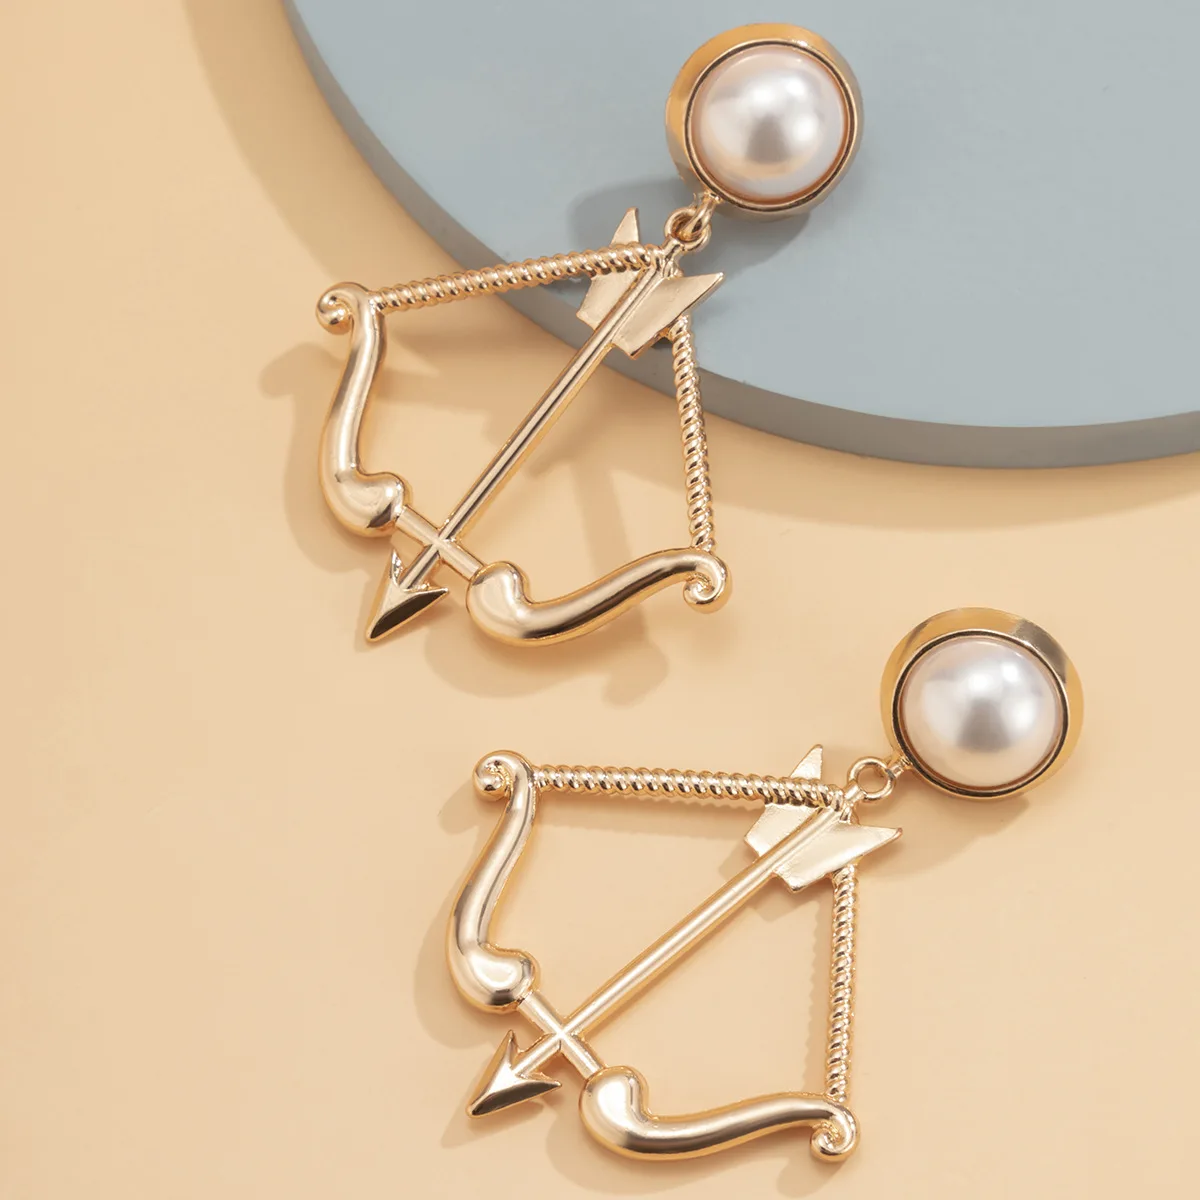 Vntage Bow and Arrow Pendant Hanging Earrings For Women Hip-hop Big Stud Earrings Fashion Imitation Pearl Piercing Jewelry 2021